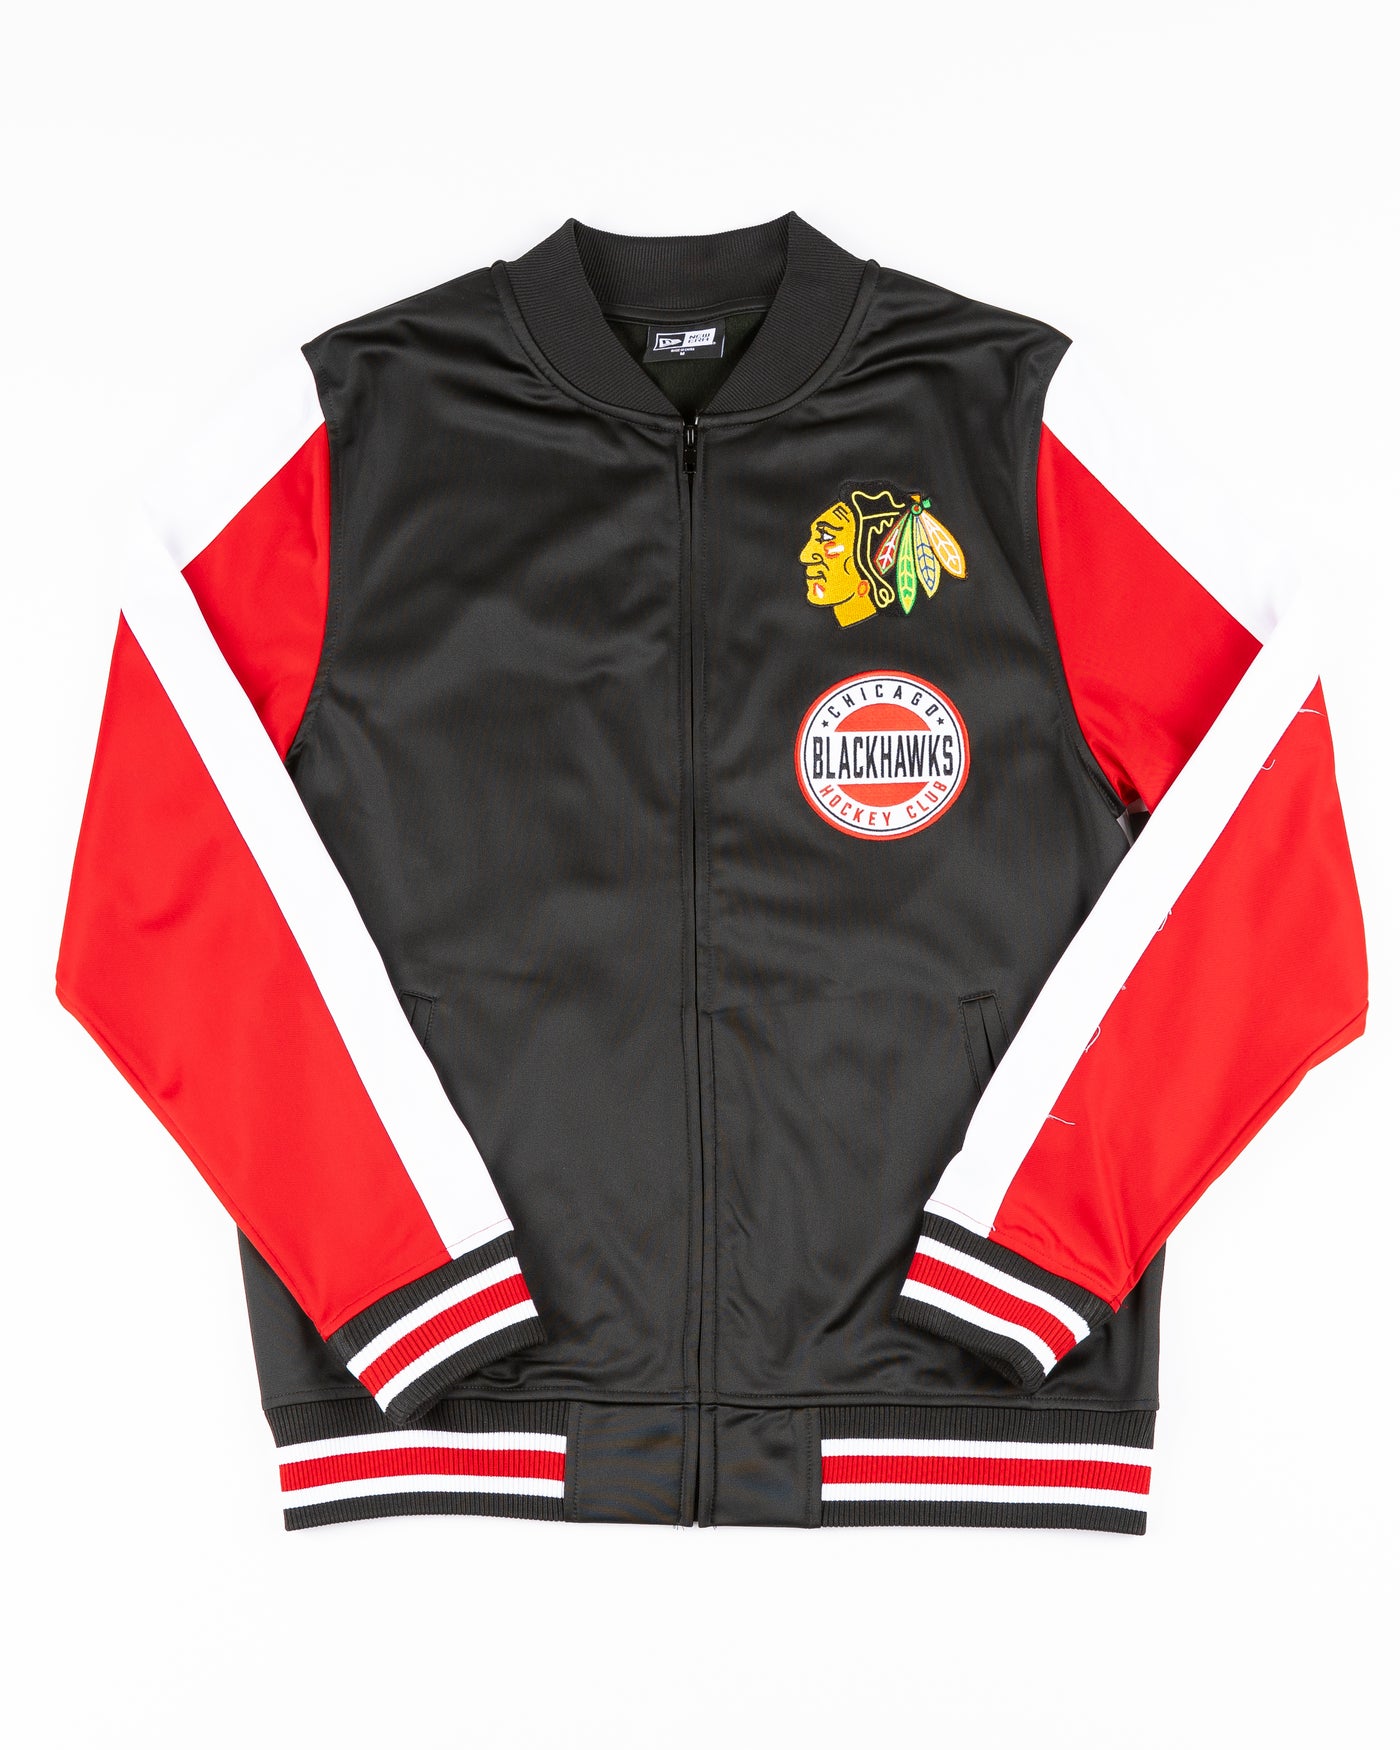 black red and white New Era track jacket with Chicago Blackhawks patches on front - front lay flat